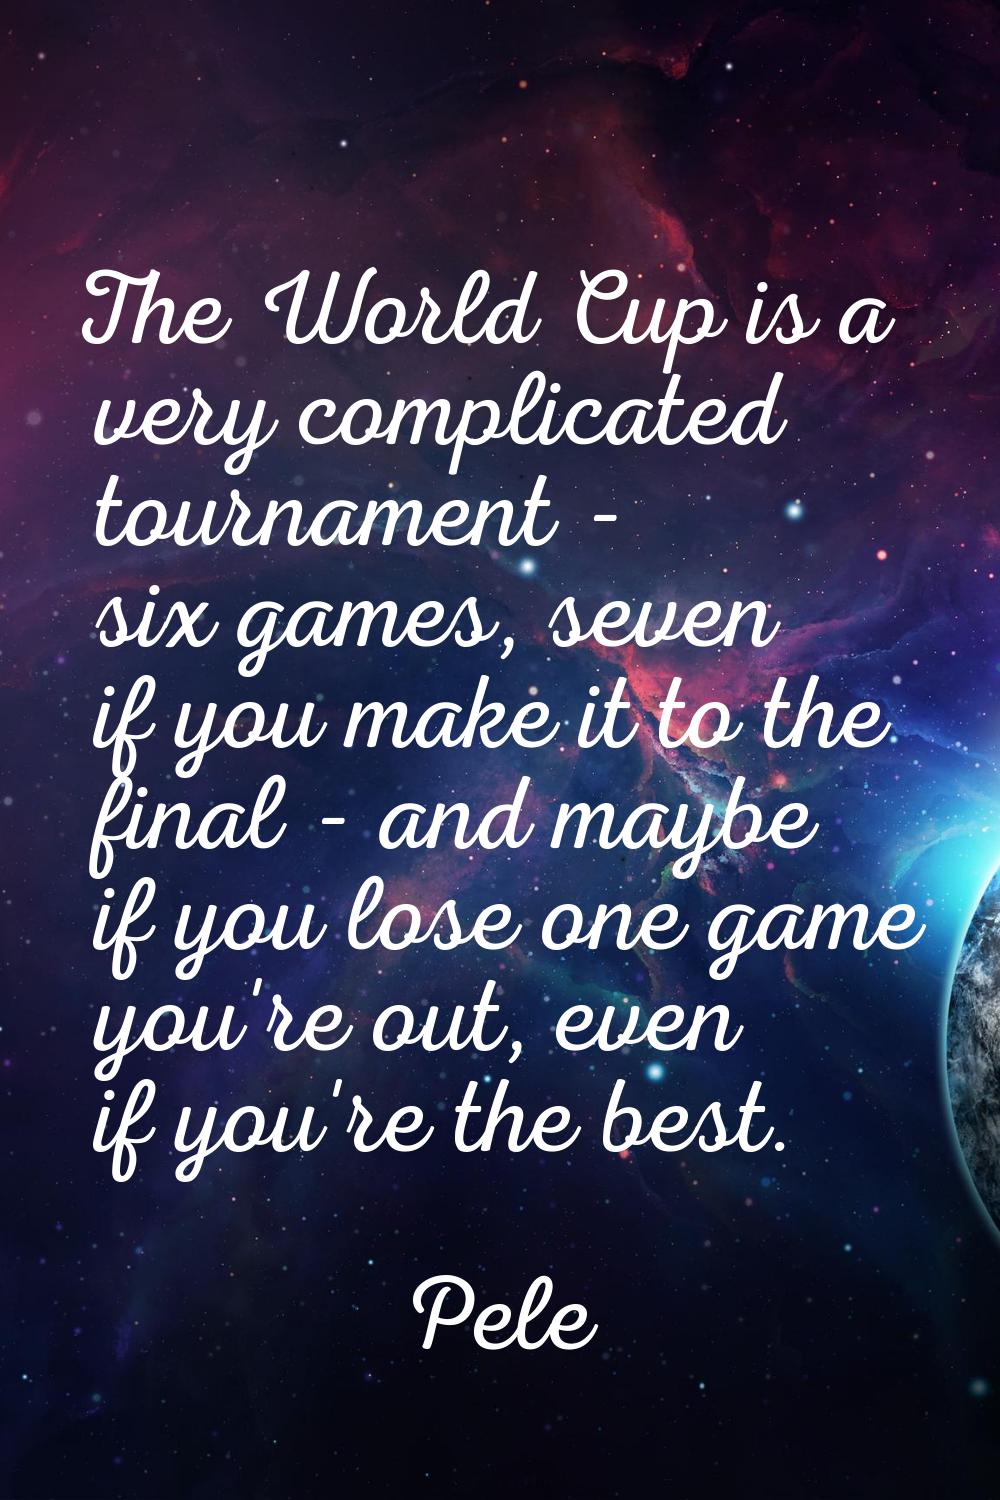 The World Cup is a very complicated tournament - six games, seven if you make it to the final - and